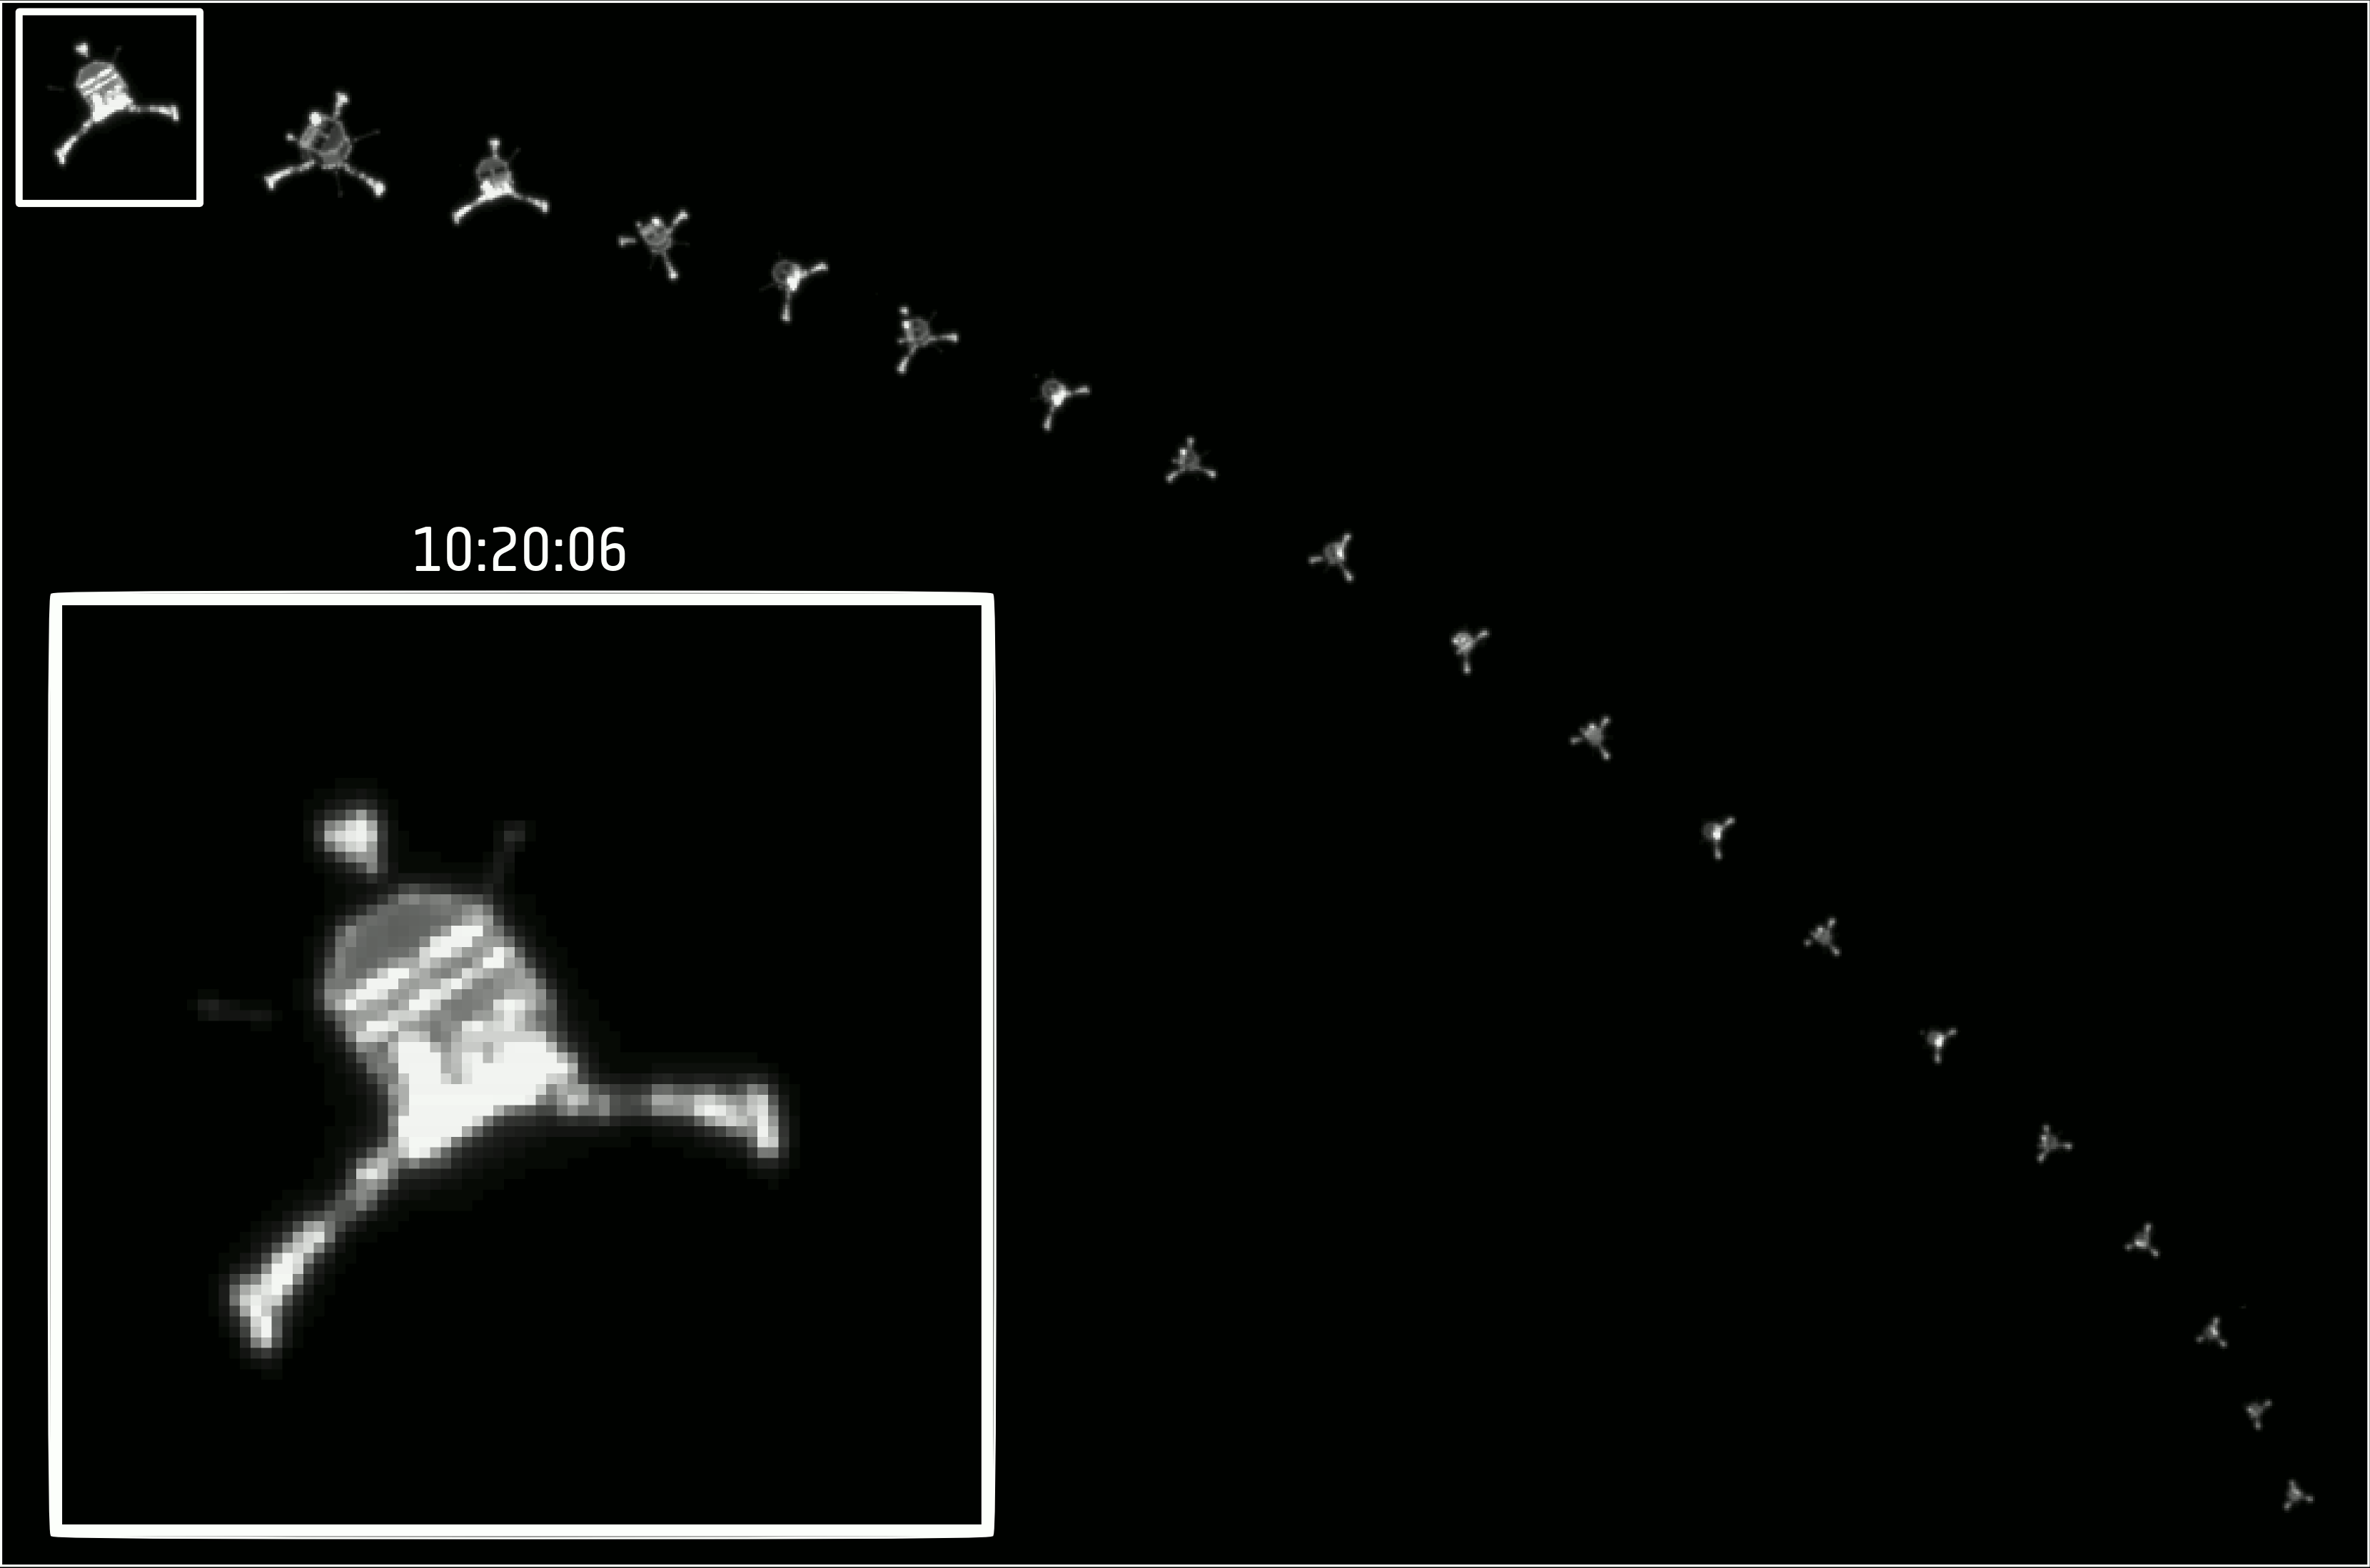 Philae descends to the comet